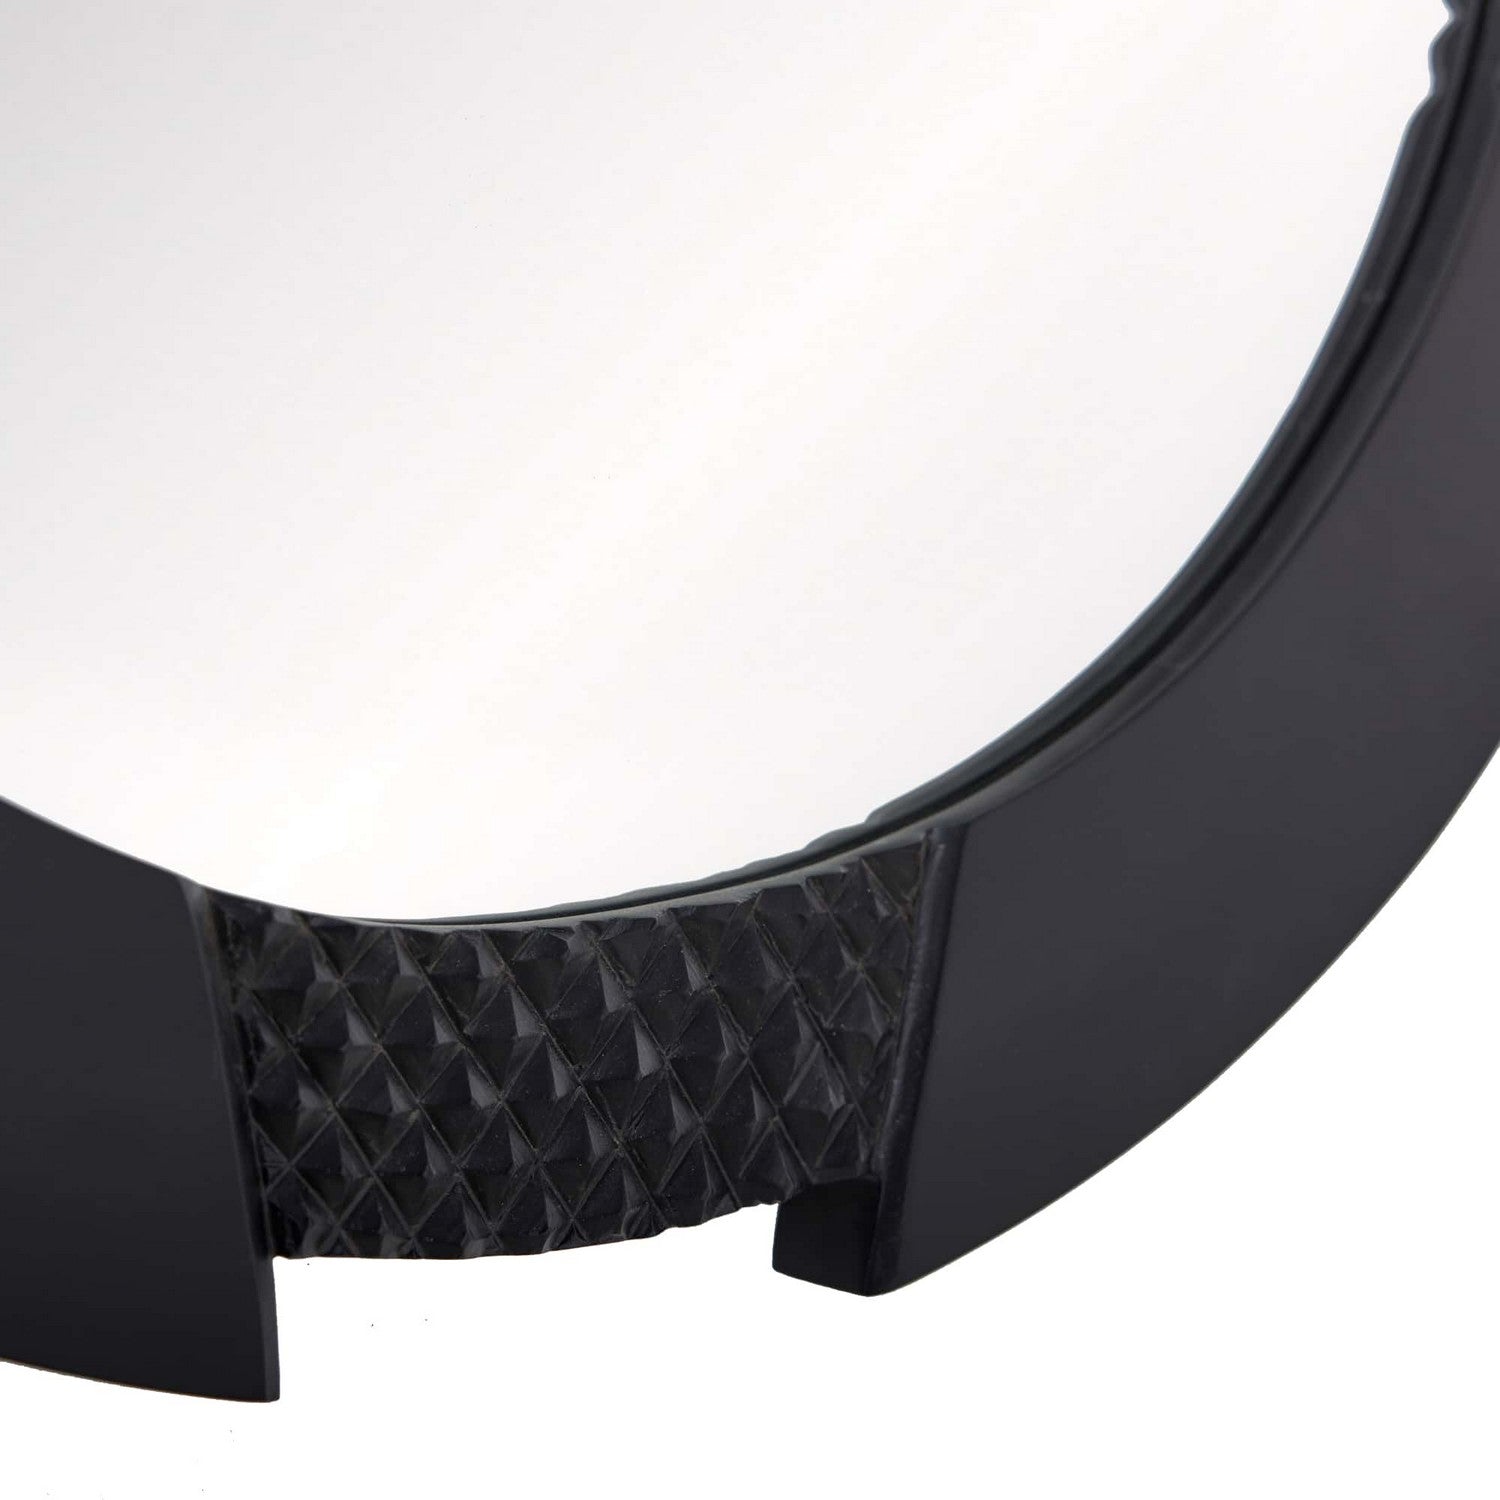 Mirror from the Tanja collection in Ebony finish